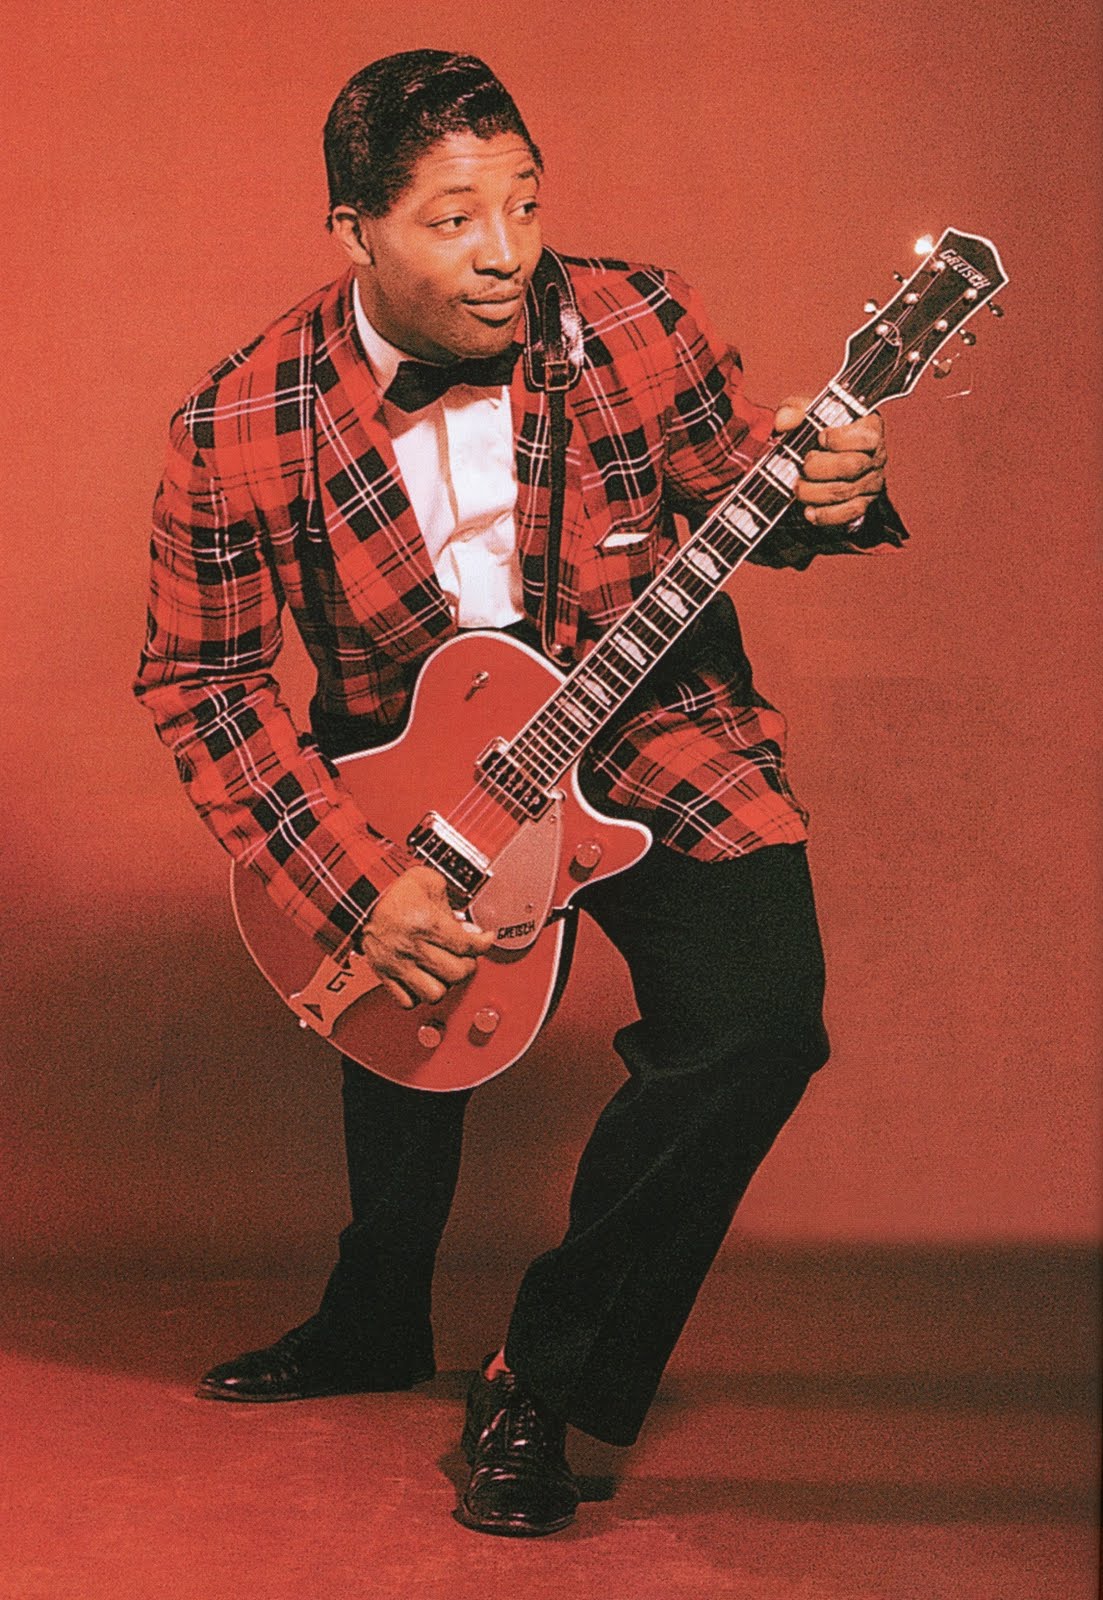 Classic Bo Diddley